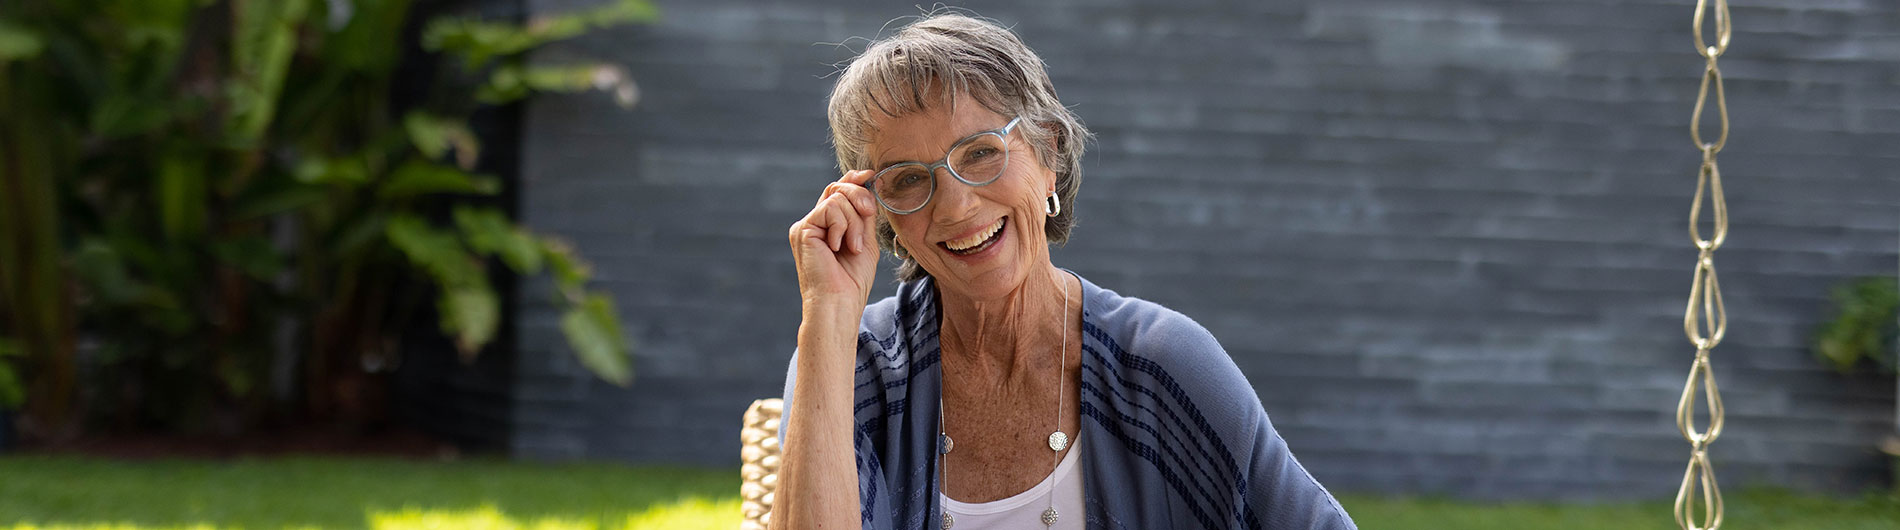 Older woman smiling and showing off her eyeglasses